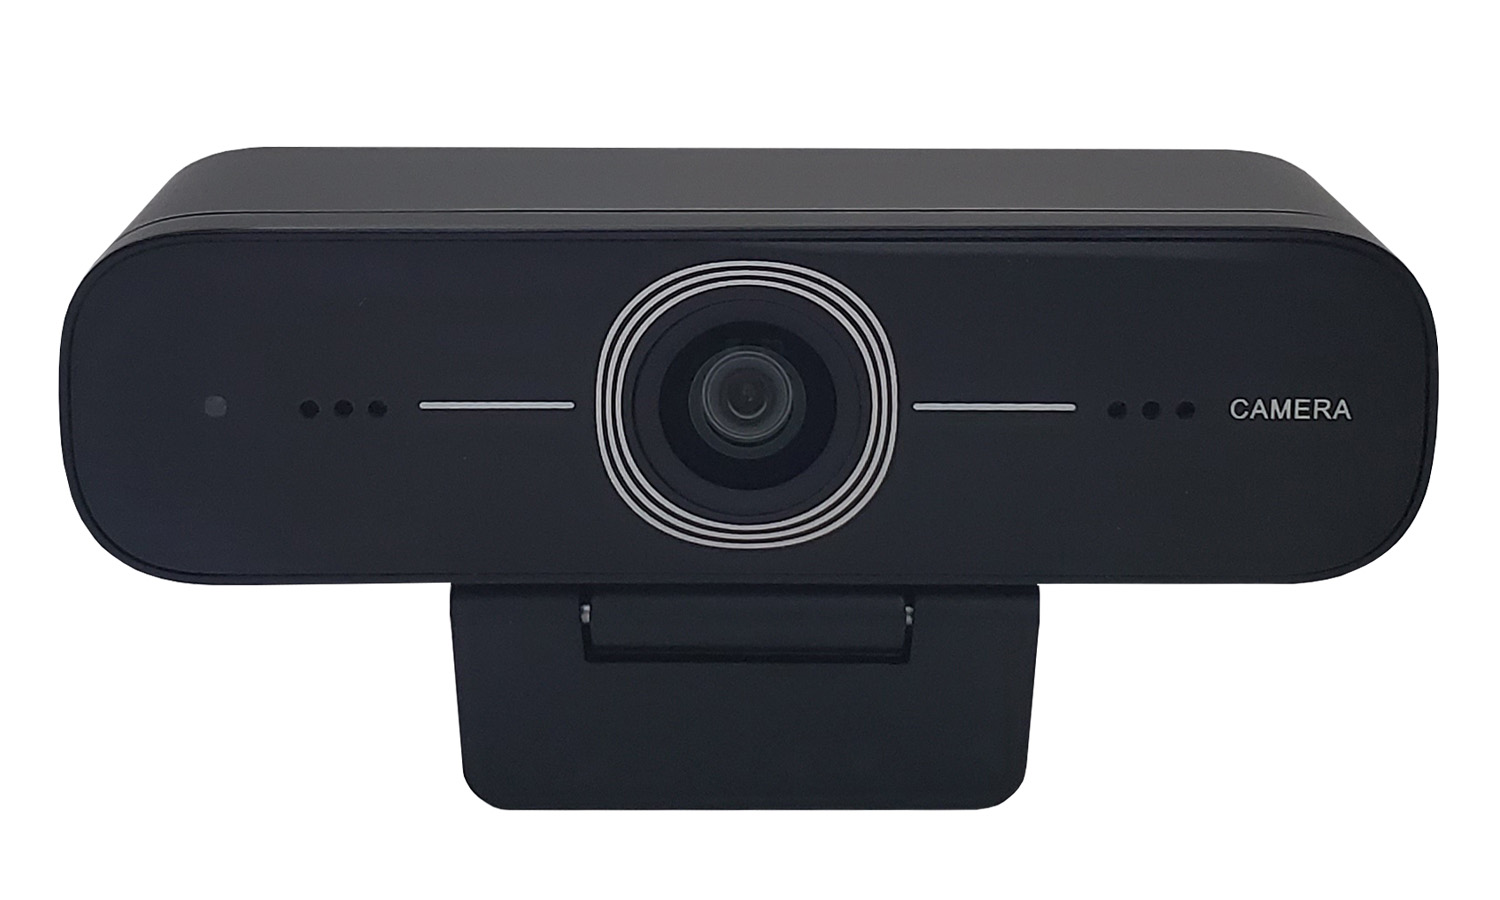 BZBGEAR BG-UC-MHD 1080P USB Conference Camera with Microphone